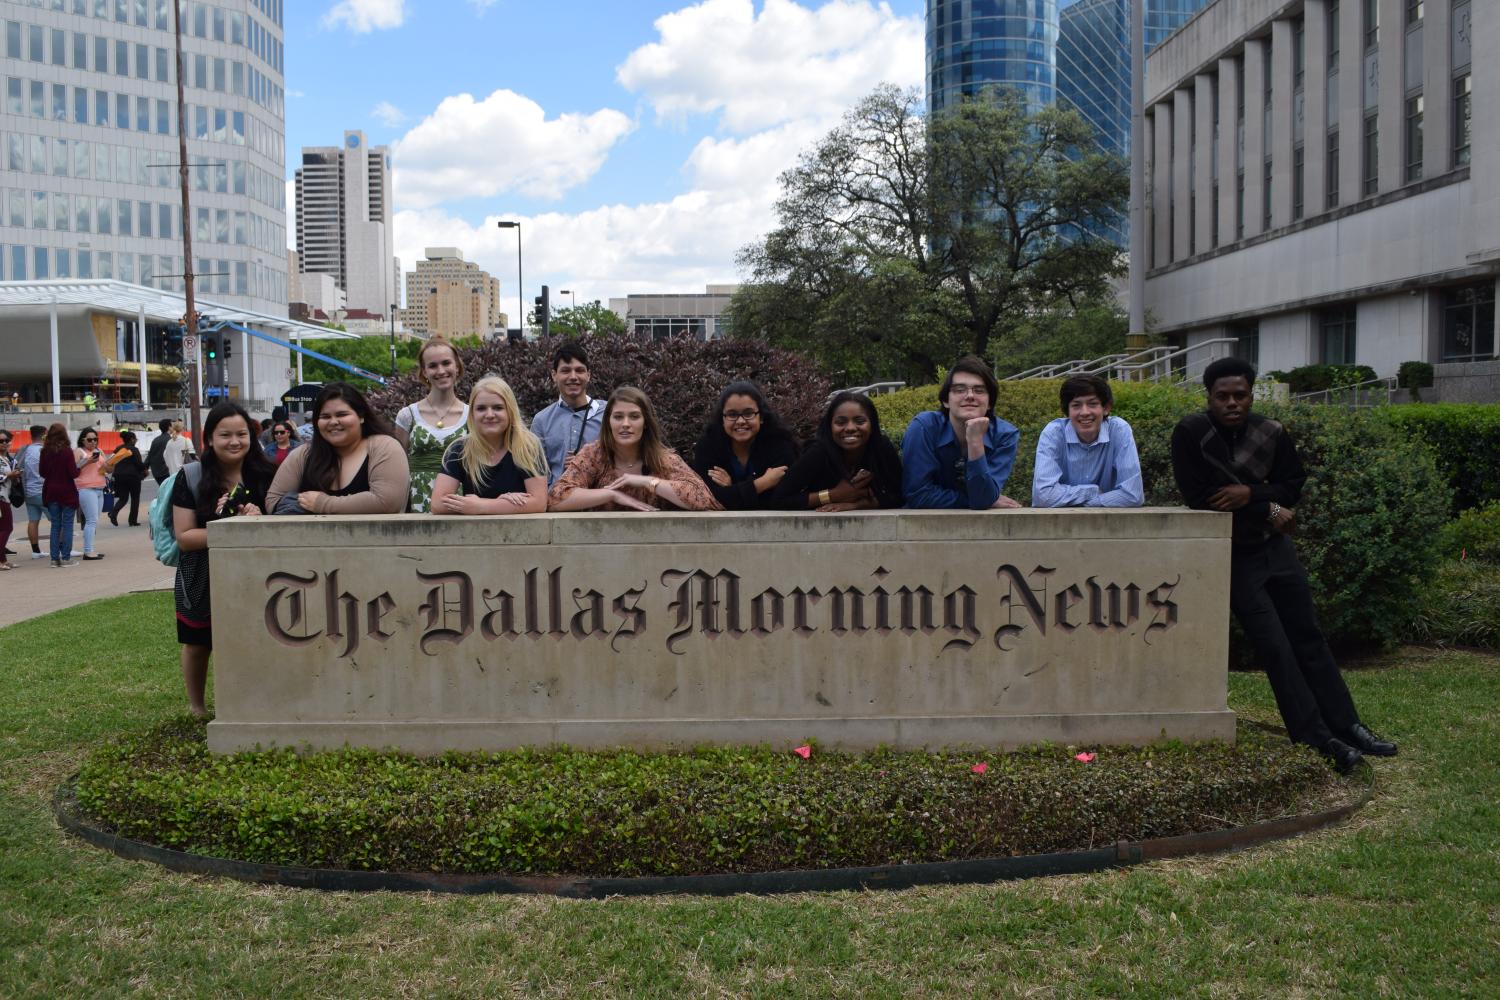 Learning+with+the+pros+%5C%5C+The+newspaper+staff+visited+Dallas+Morning+News+for+their+annual+journalism+day.+Students+attended+workshops+on+design%2C+writing%2C+photography%2C+etc.